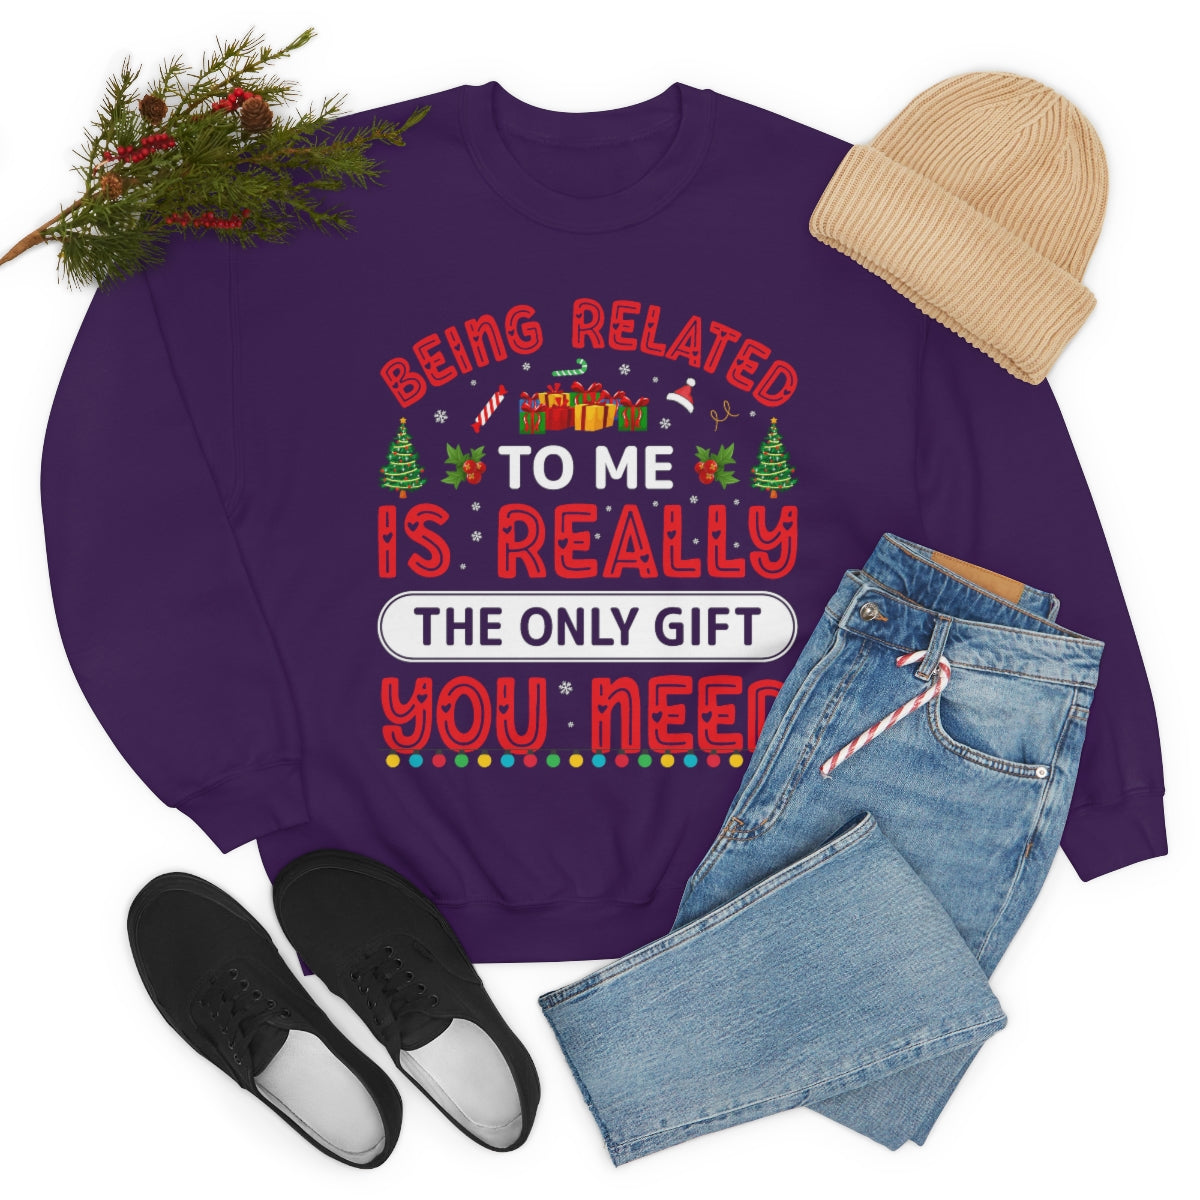 Funny Ugly Holiday Sweater, Related to Me Christmas Xmas Print Women Men Vintage Funny Party Winter Plus Size Sweatshirt Gift Starcove Fashion